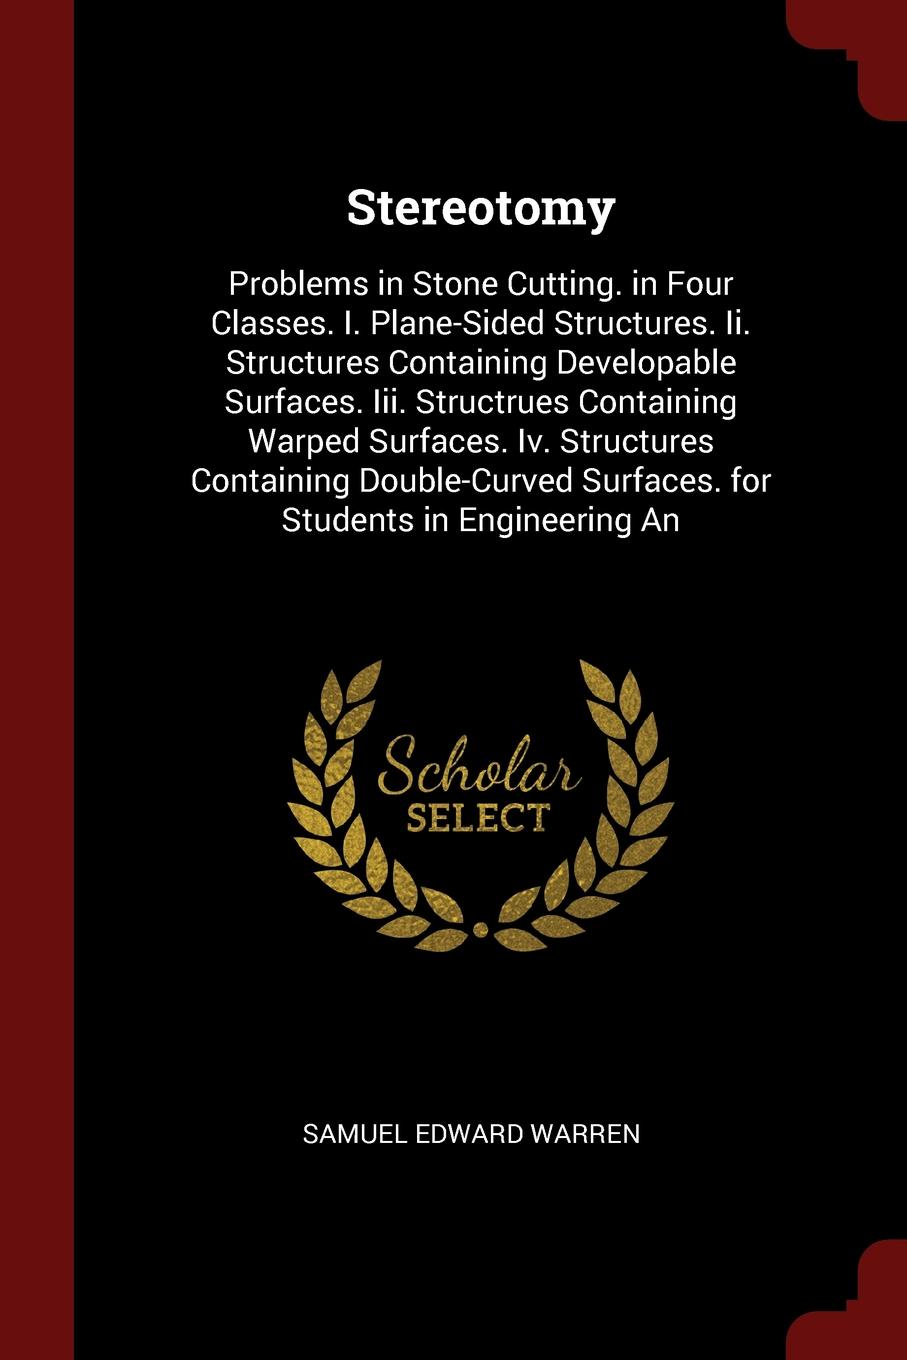 Stereotomy. Problems in Stone Cutting. in Four Classes. I. Plane-Sided Structures. Ii. Structures Containing Developable Surfaces. Iii. Structrues Containing Warped Surfaces. Iv. Structures Containing Double-Curved Surfaces. for Students in Engine...